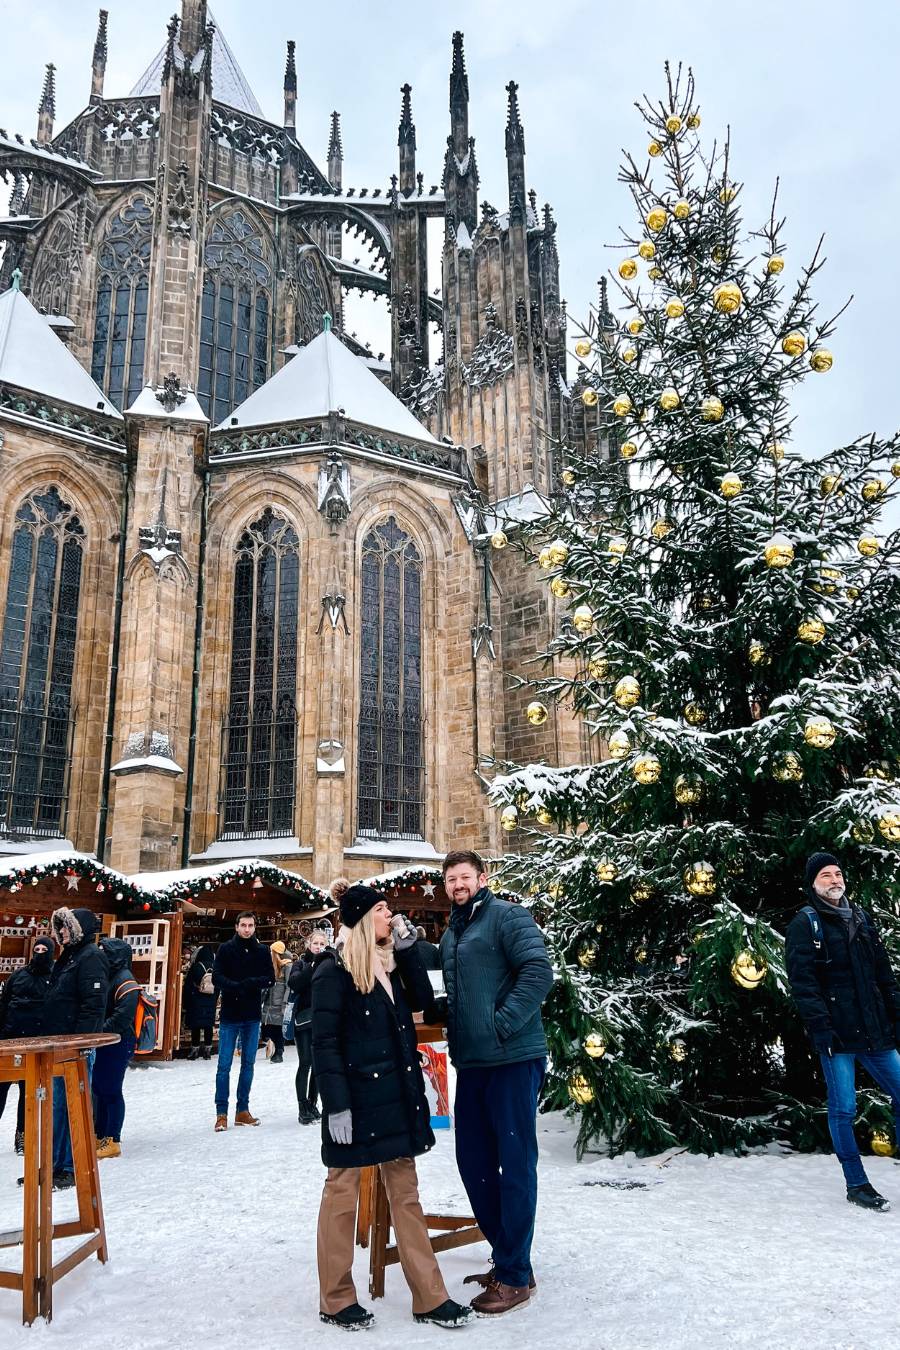 How to plan a trip to the Christmas Markets in Europe